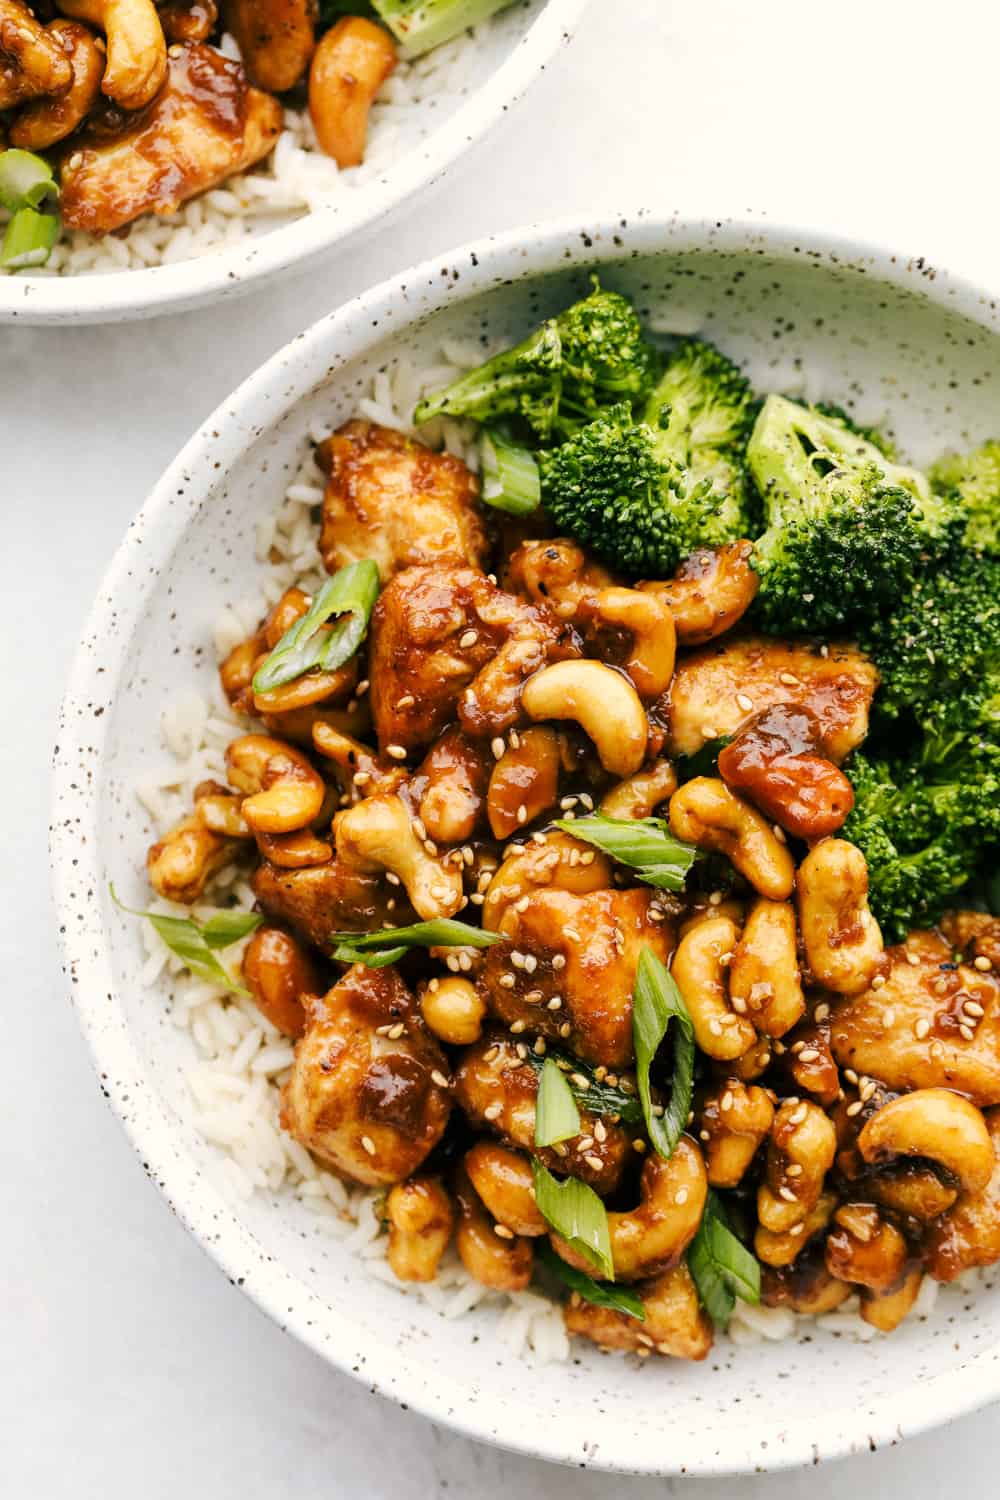 Cashew chicken on bed of rice with broccoli